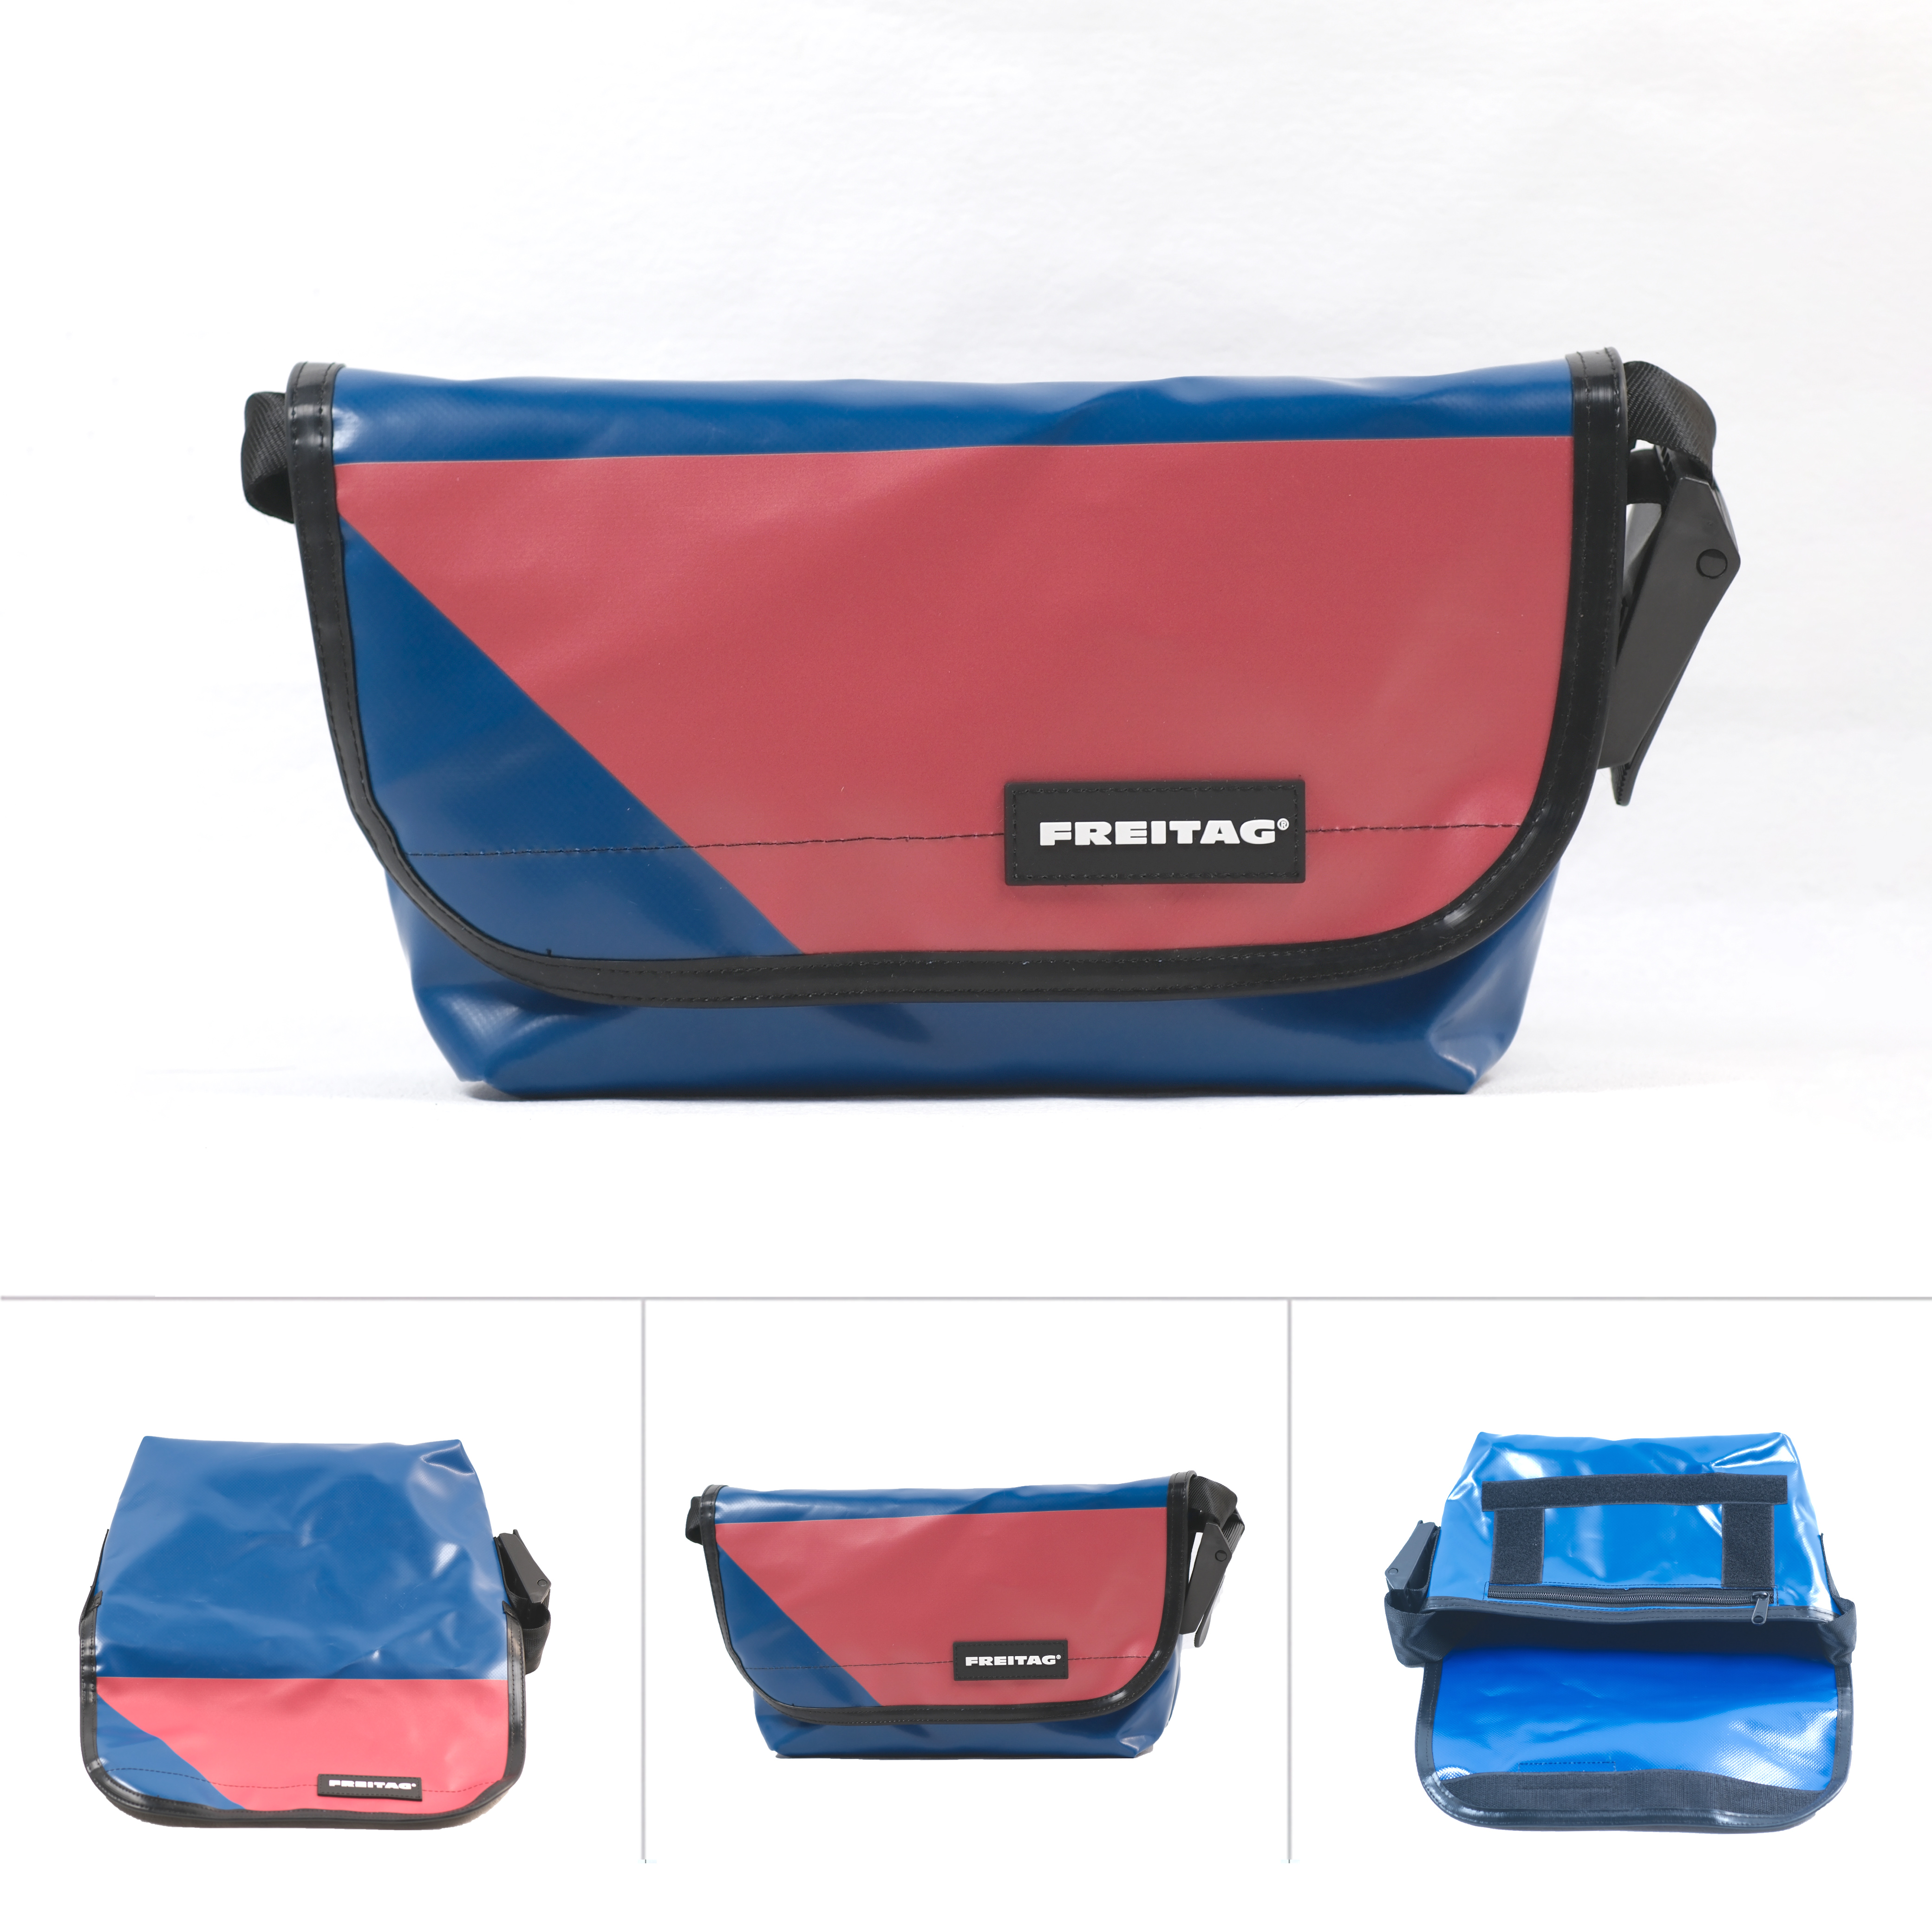 The F41 HAWAII FIVE-0 our extra small messenger bag is a proven